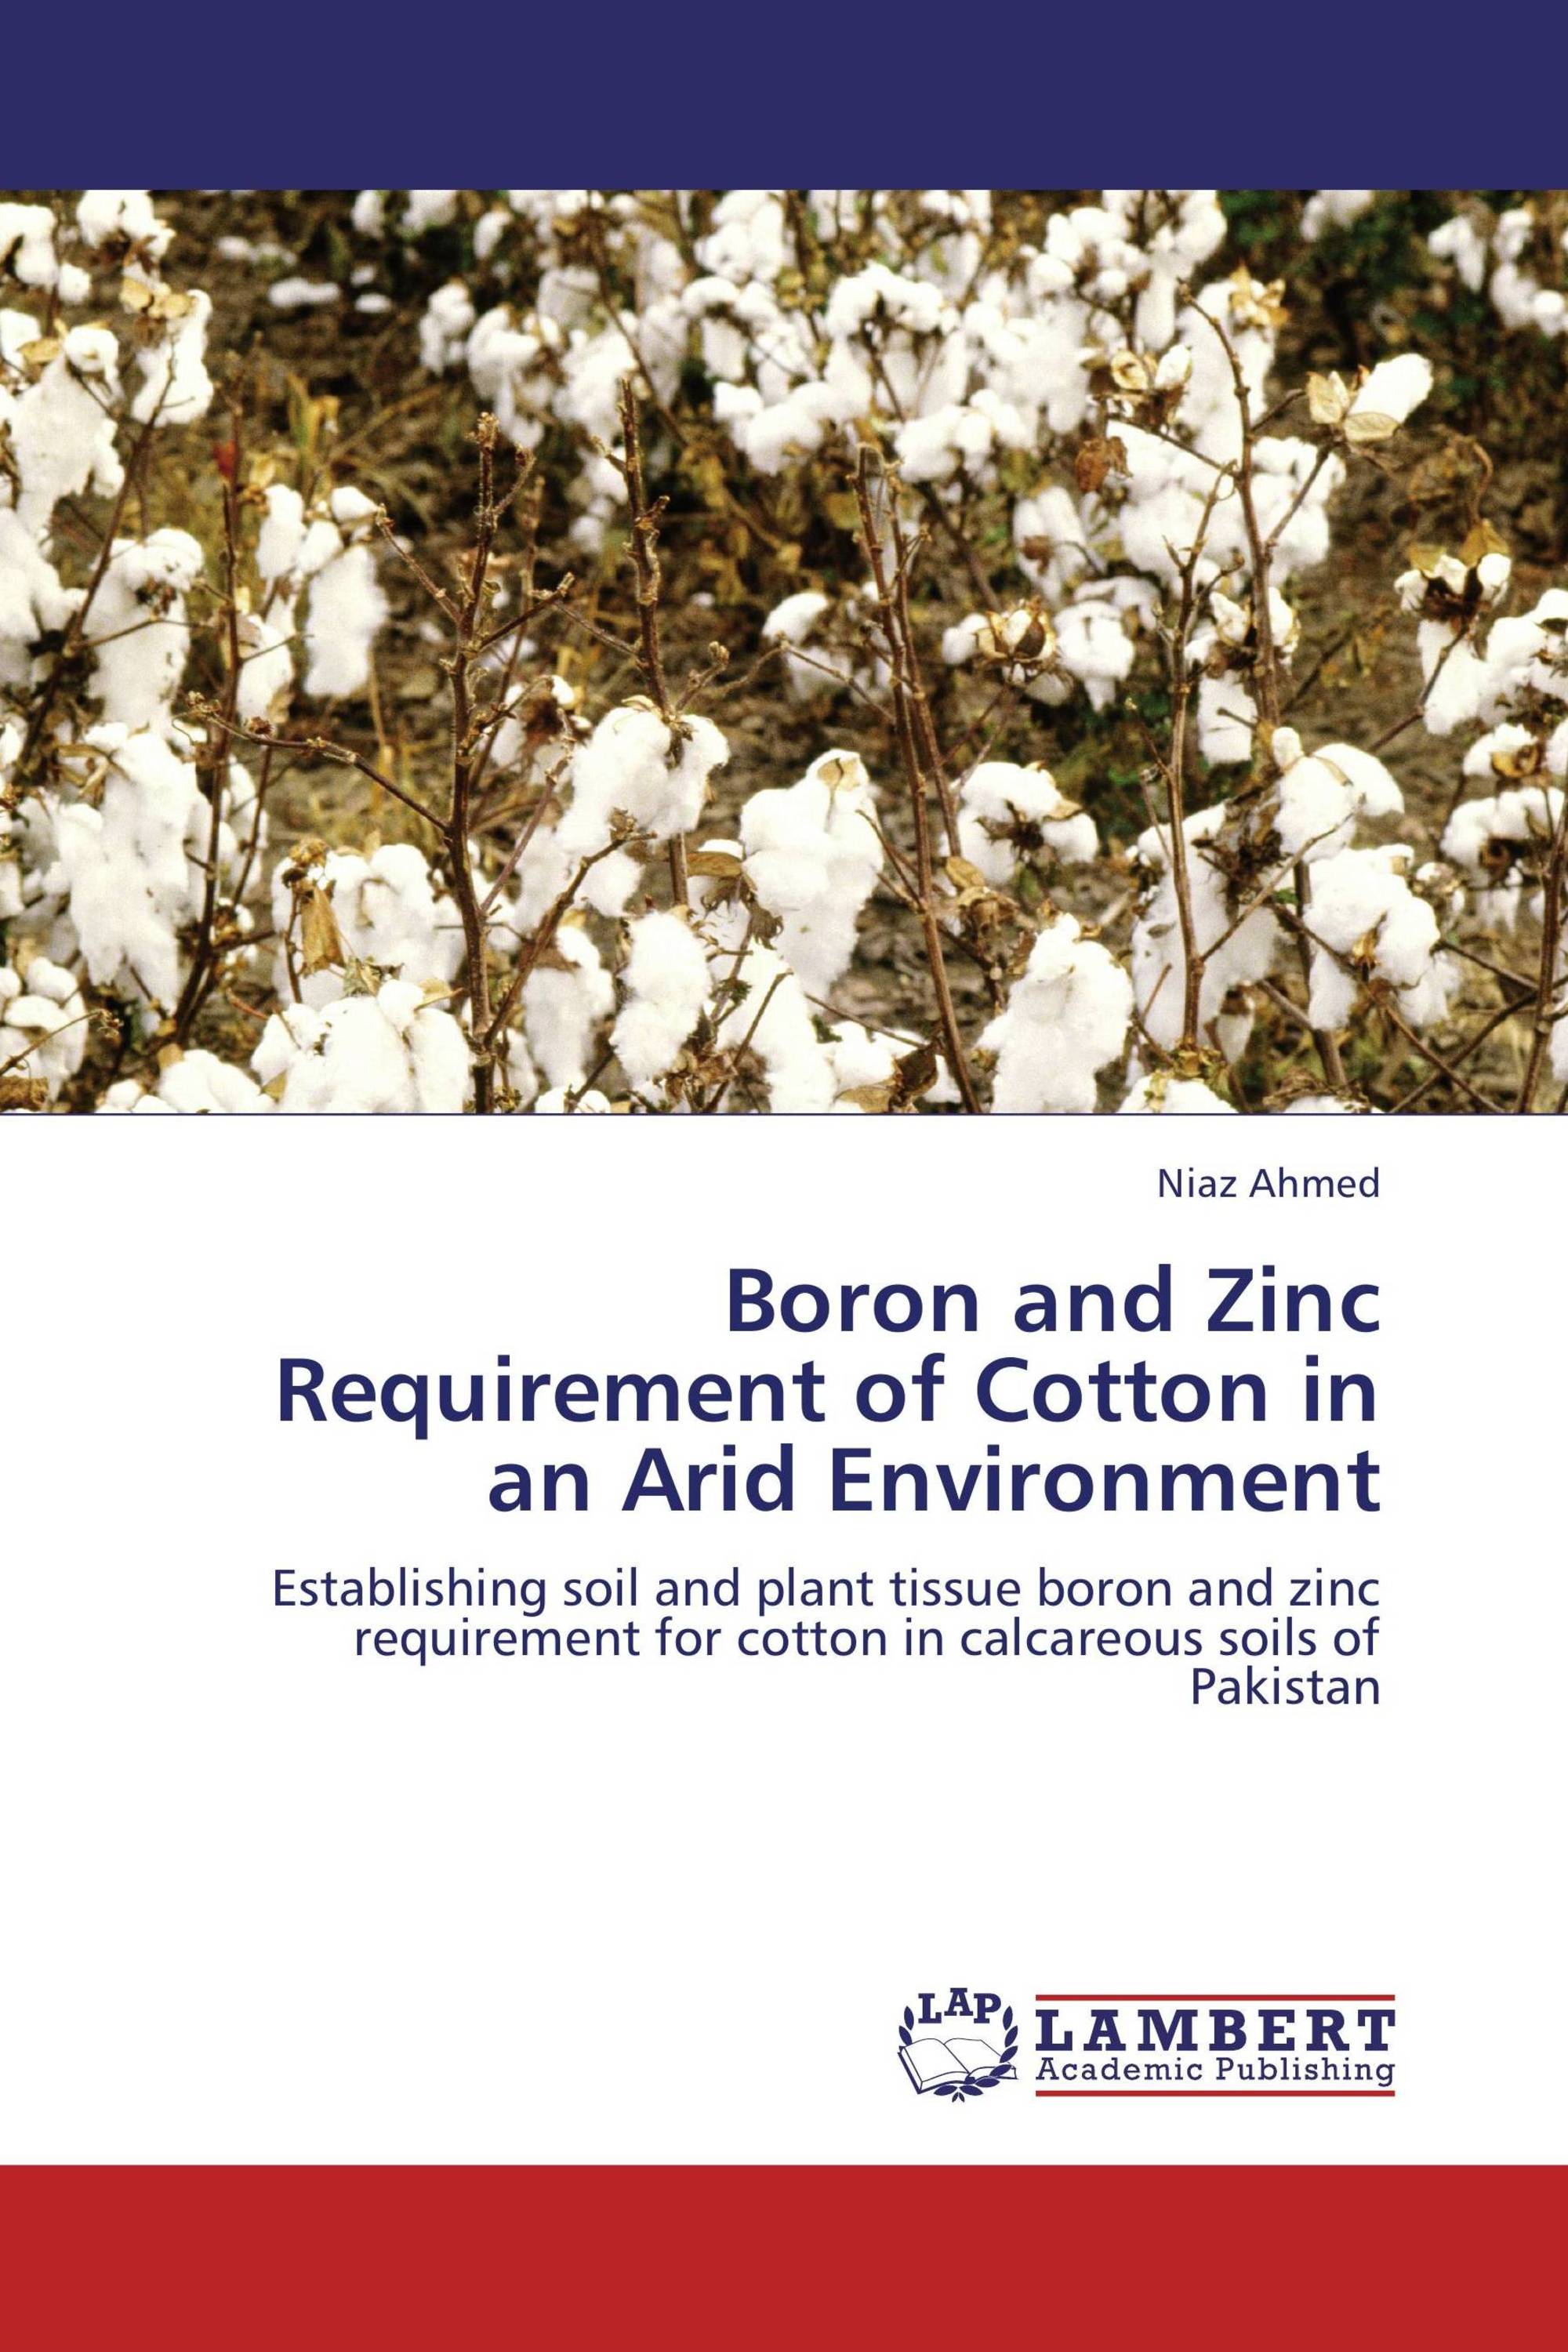 Boron and Zinc Requirement of Cotton in an Arid Environment